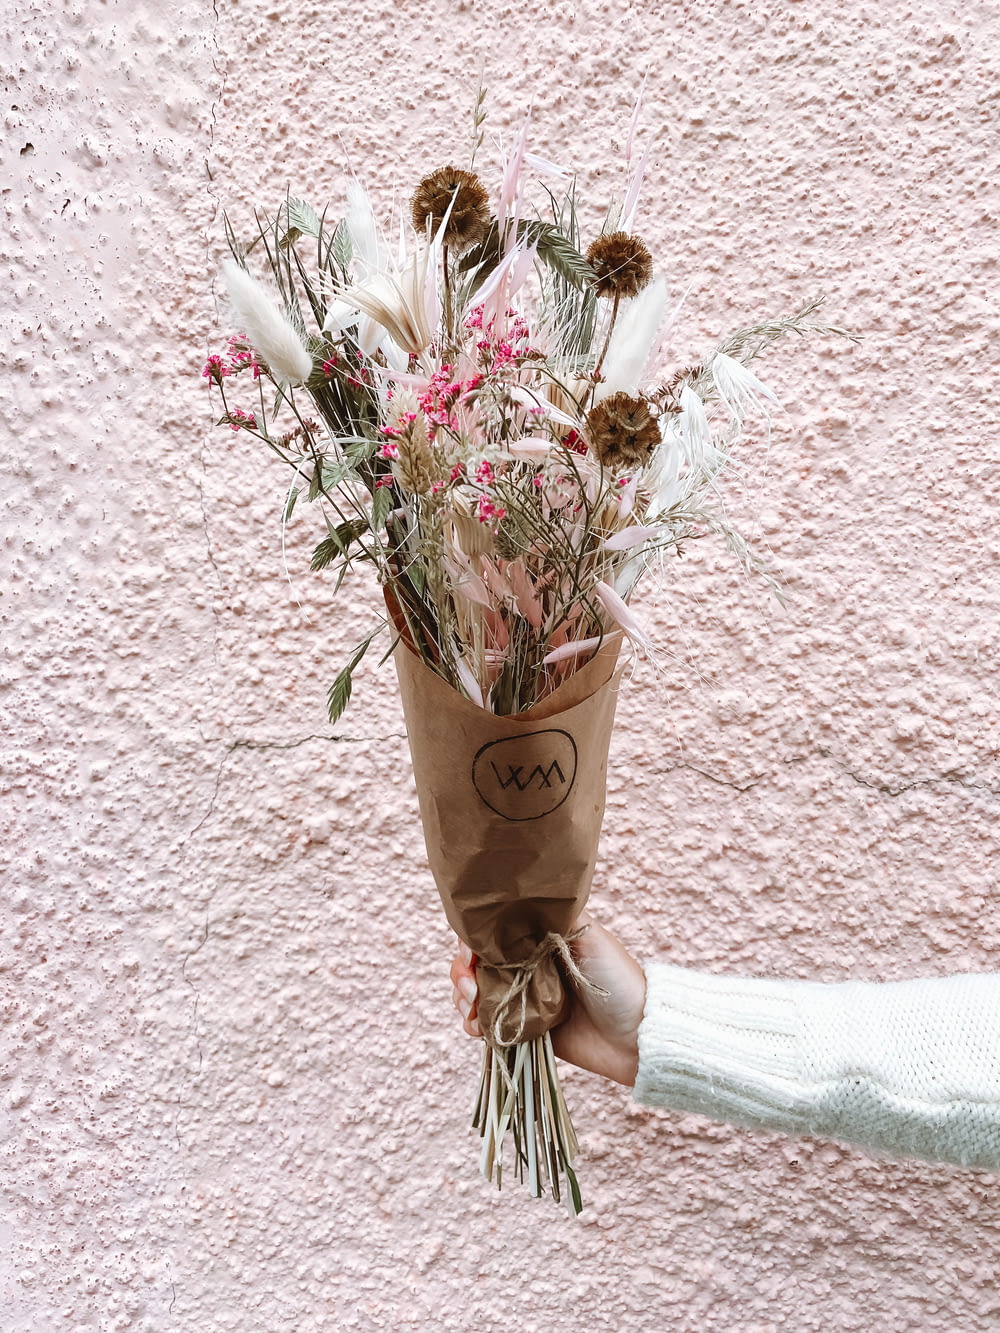 a person holding a paper bag with flowers in it